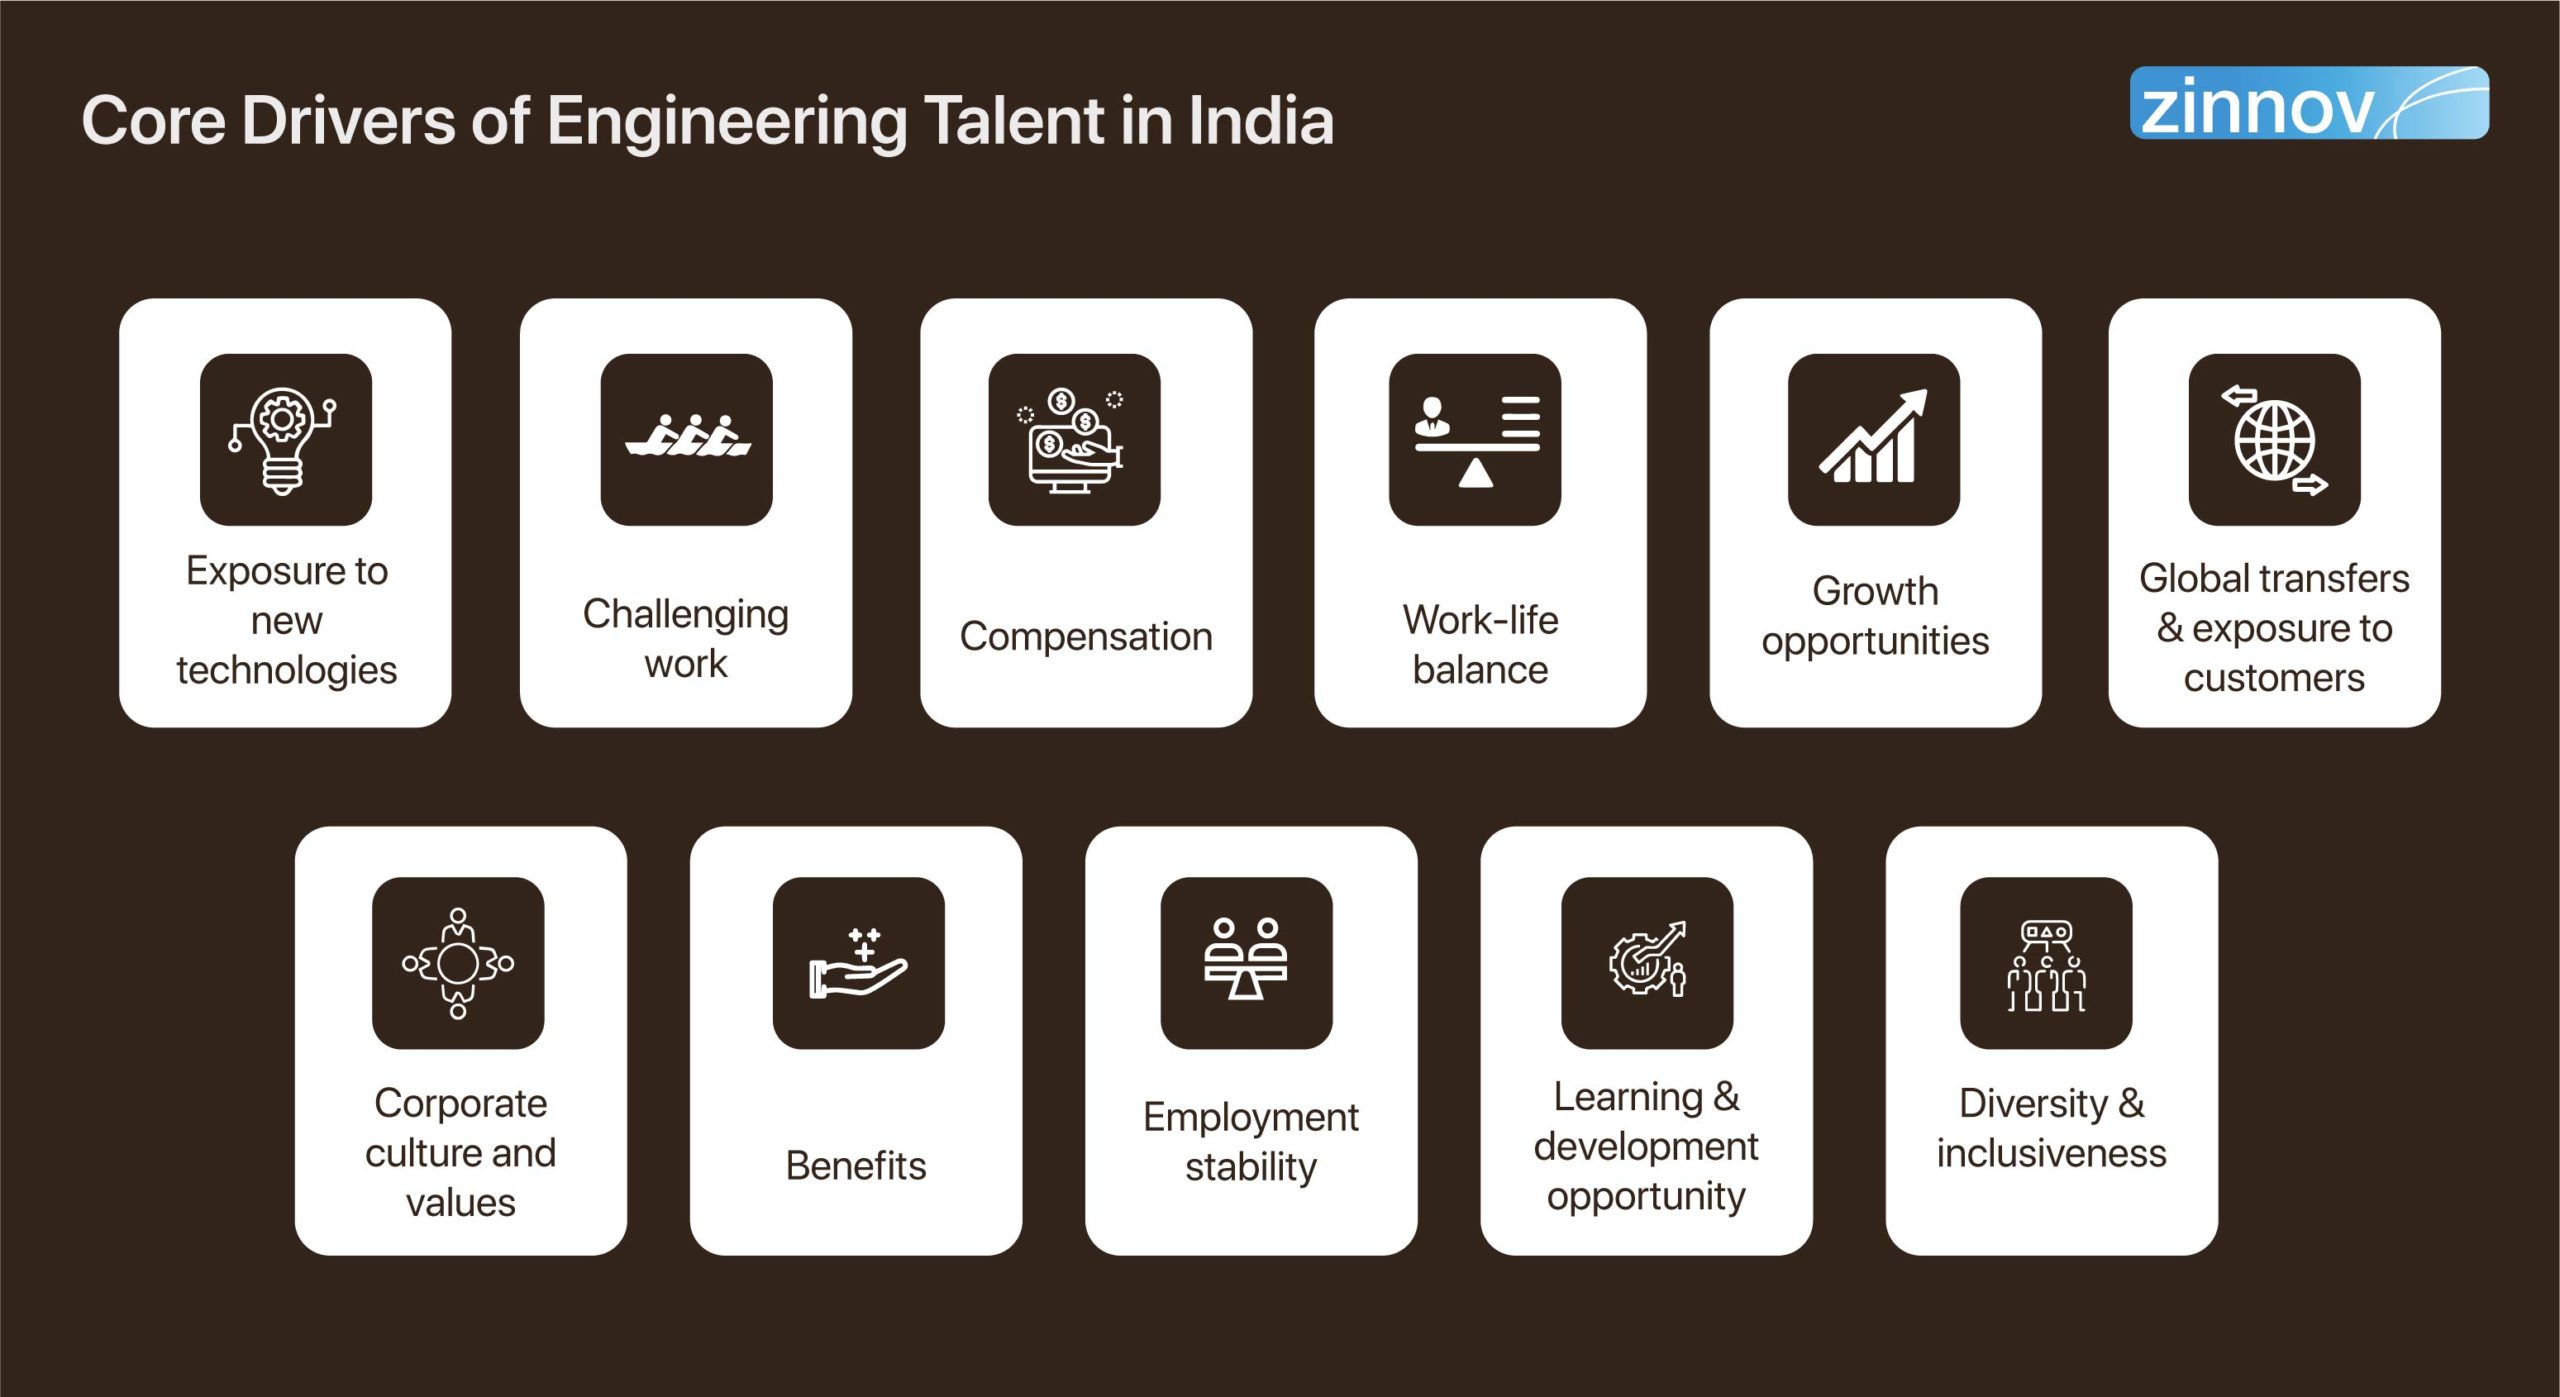 Core drivers of engineering talent in India